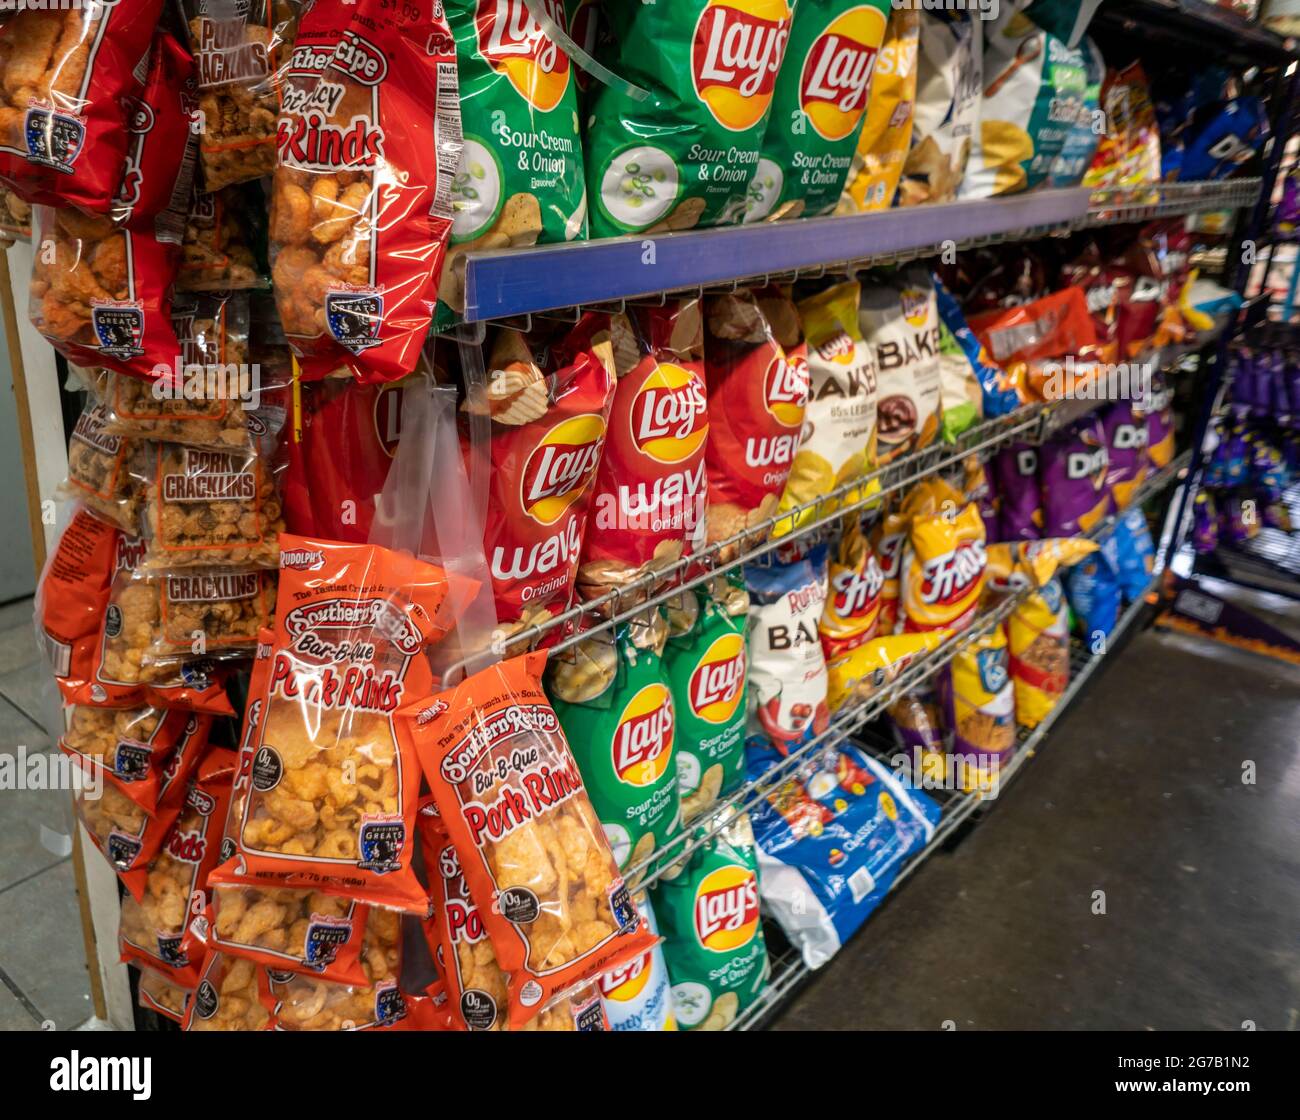 A display of tasty but not particularly healthy snacks including pork rinds and Frito-Lay brand chips in New York on Tuesday, July 6, 2021. Frito-Lay is a brand of Pepsico. (© Richard B. Levine) Stock Photo